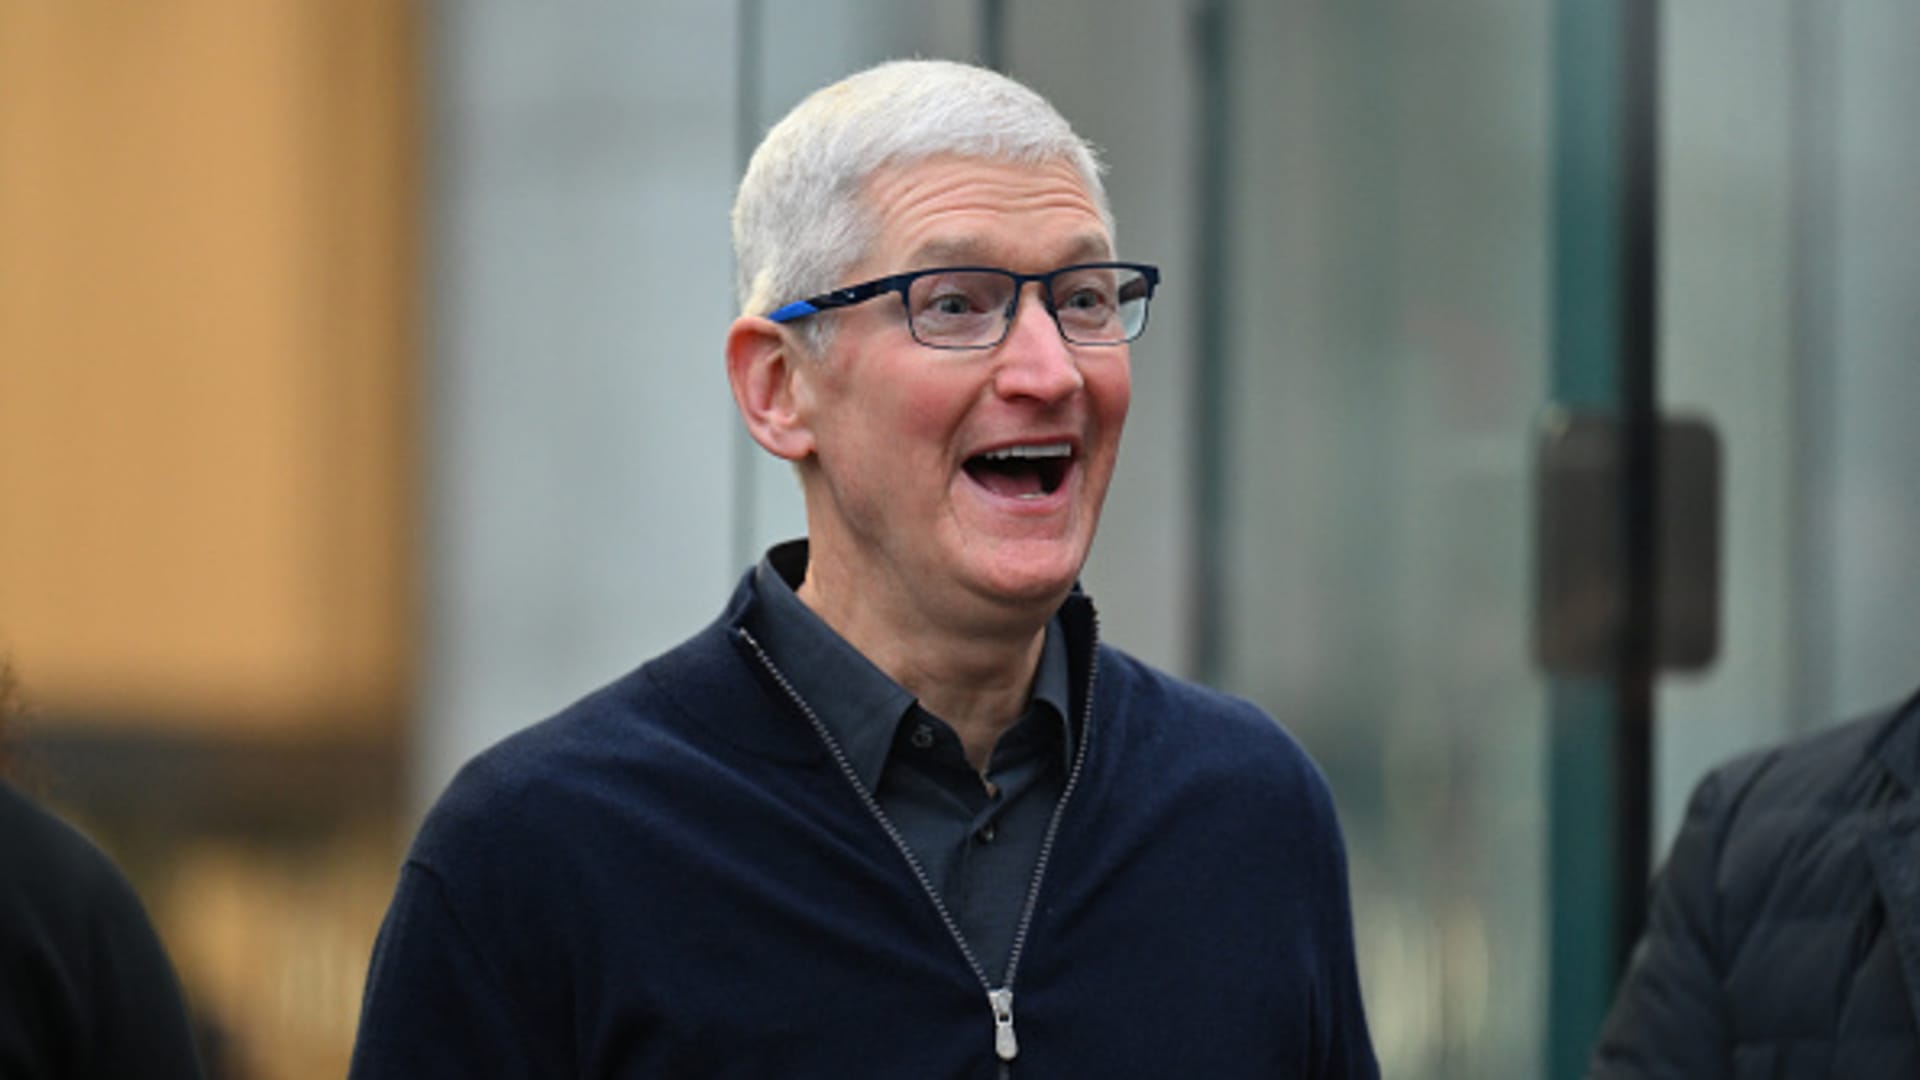 Apple CEO Tim Cook says company is ‘investing significantly’ in generative AI